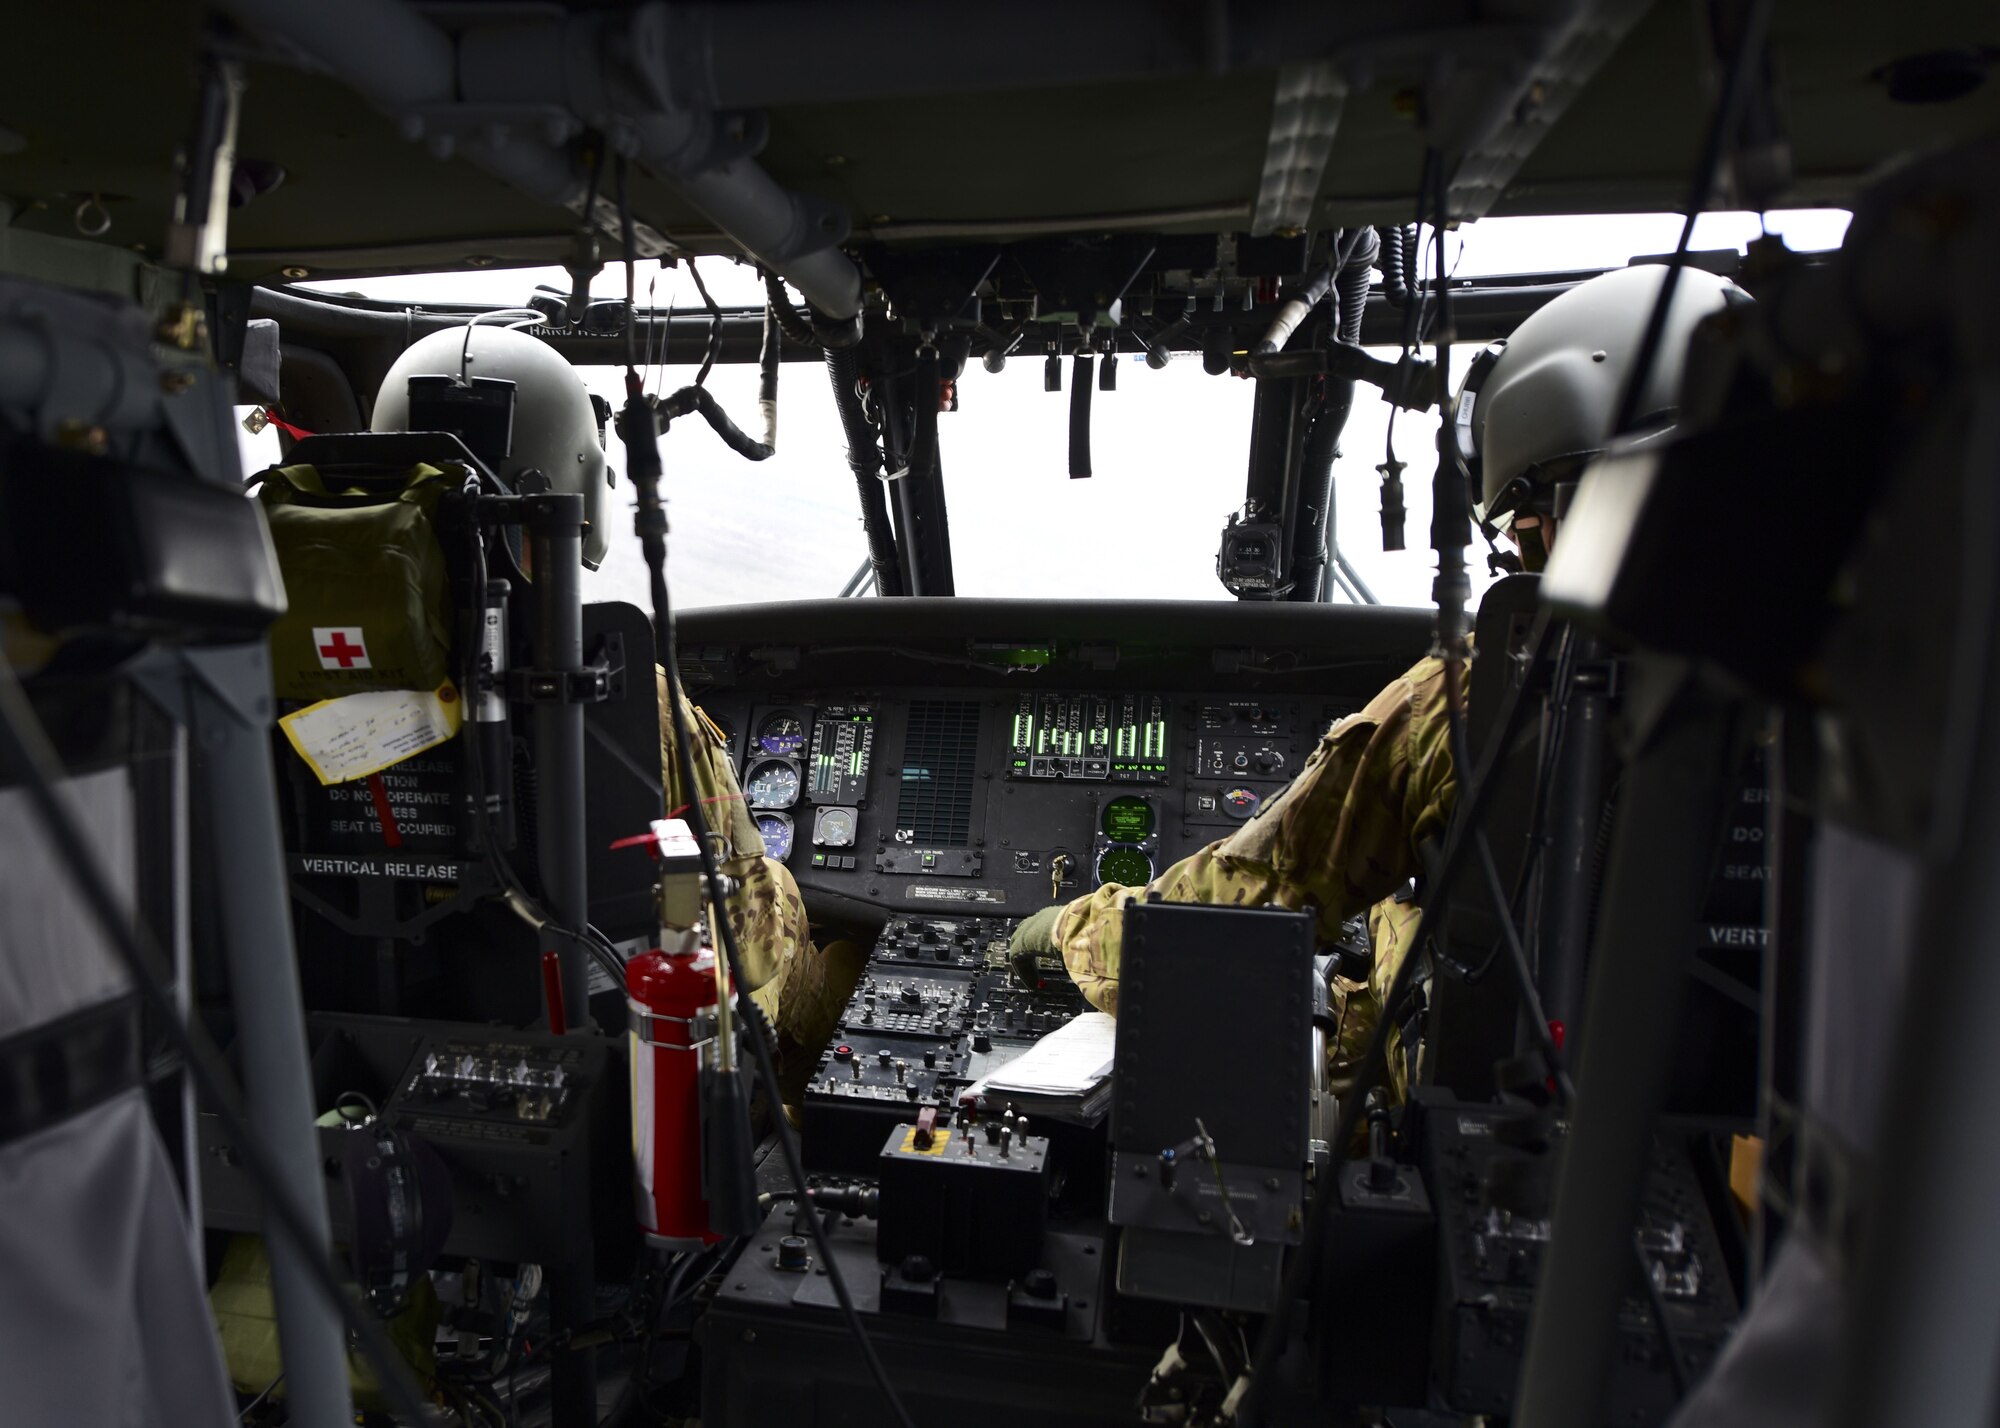 Pilots of a UH-0 Black Hawk land during a joint training with Joint Terminal Attack Controllers at Warshaw, Mo., Jan. 31, 2018. This training allowed both parties to work together and begin standardizing how JTACs are integrated into a multi-domain fight. (U.S. Air Force by Staff Sgt. Danielle Quilla)